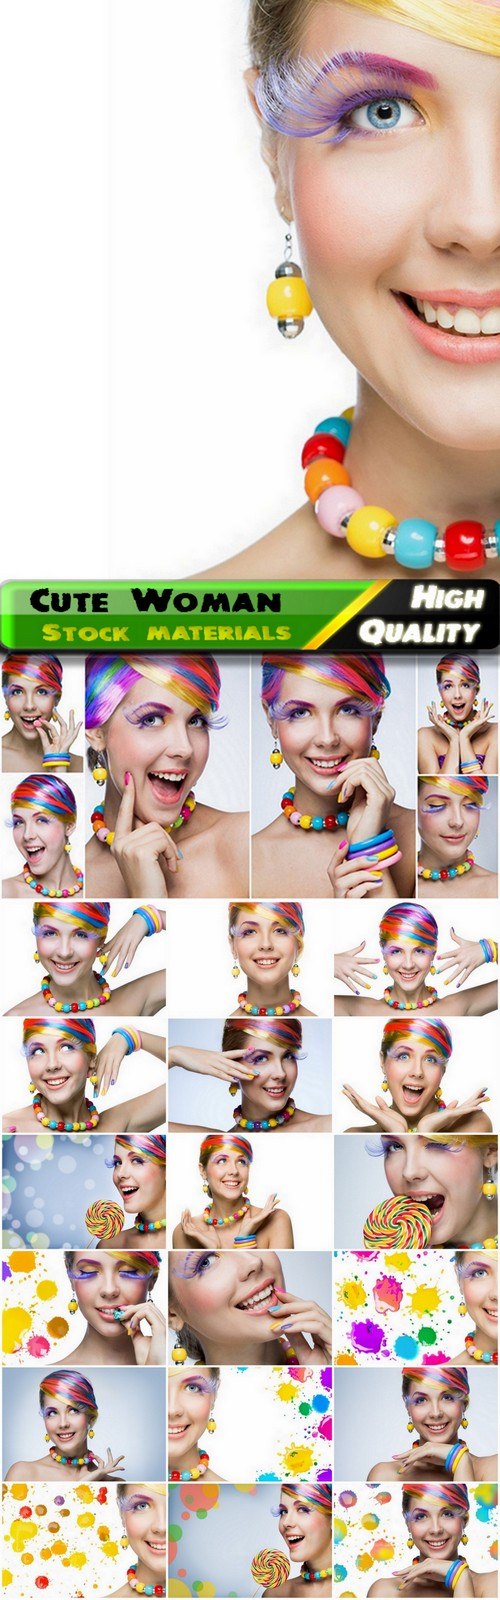 Woman with multi-colored hair and makeup - 25 HQ Jpg